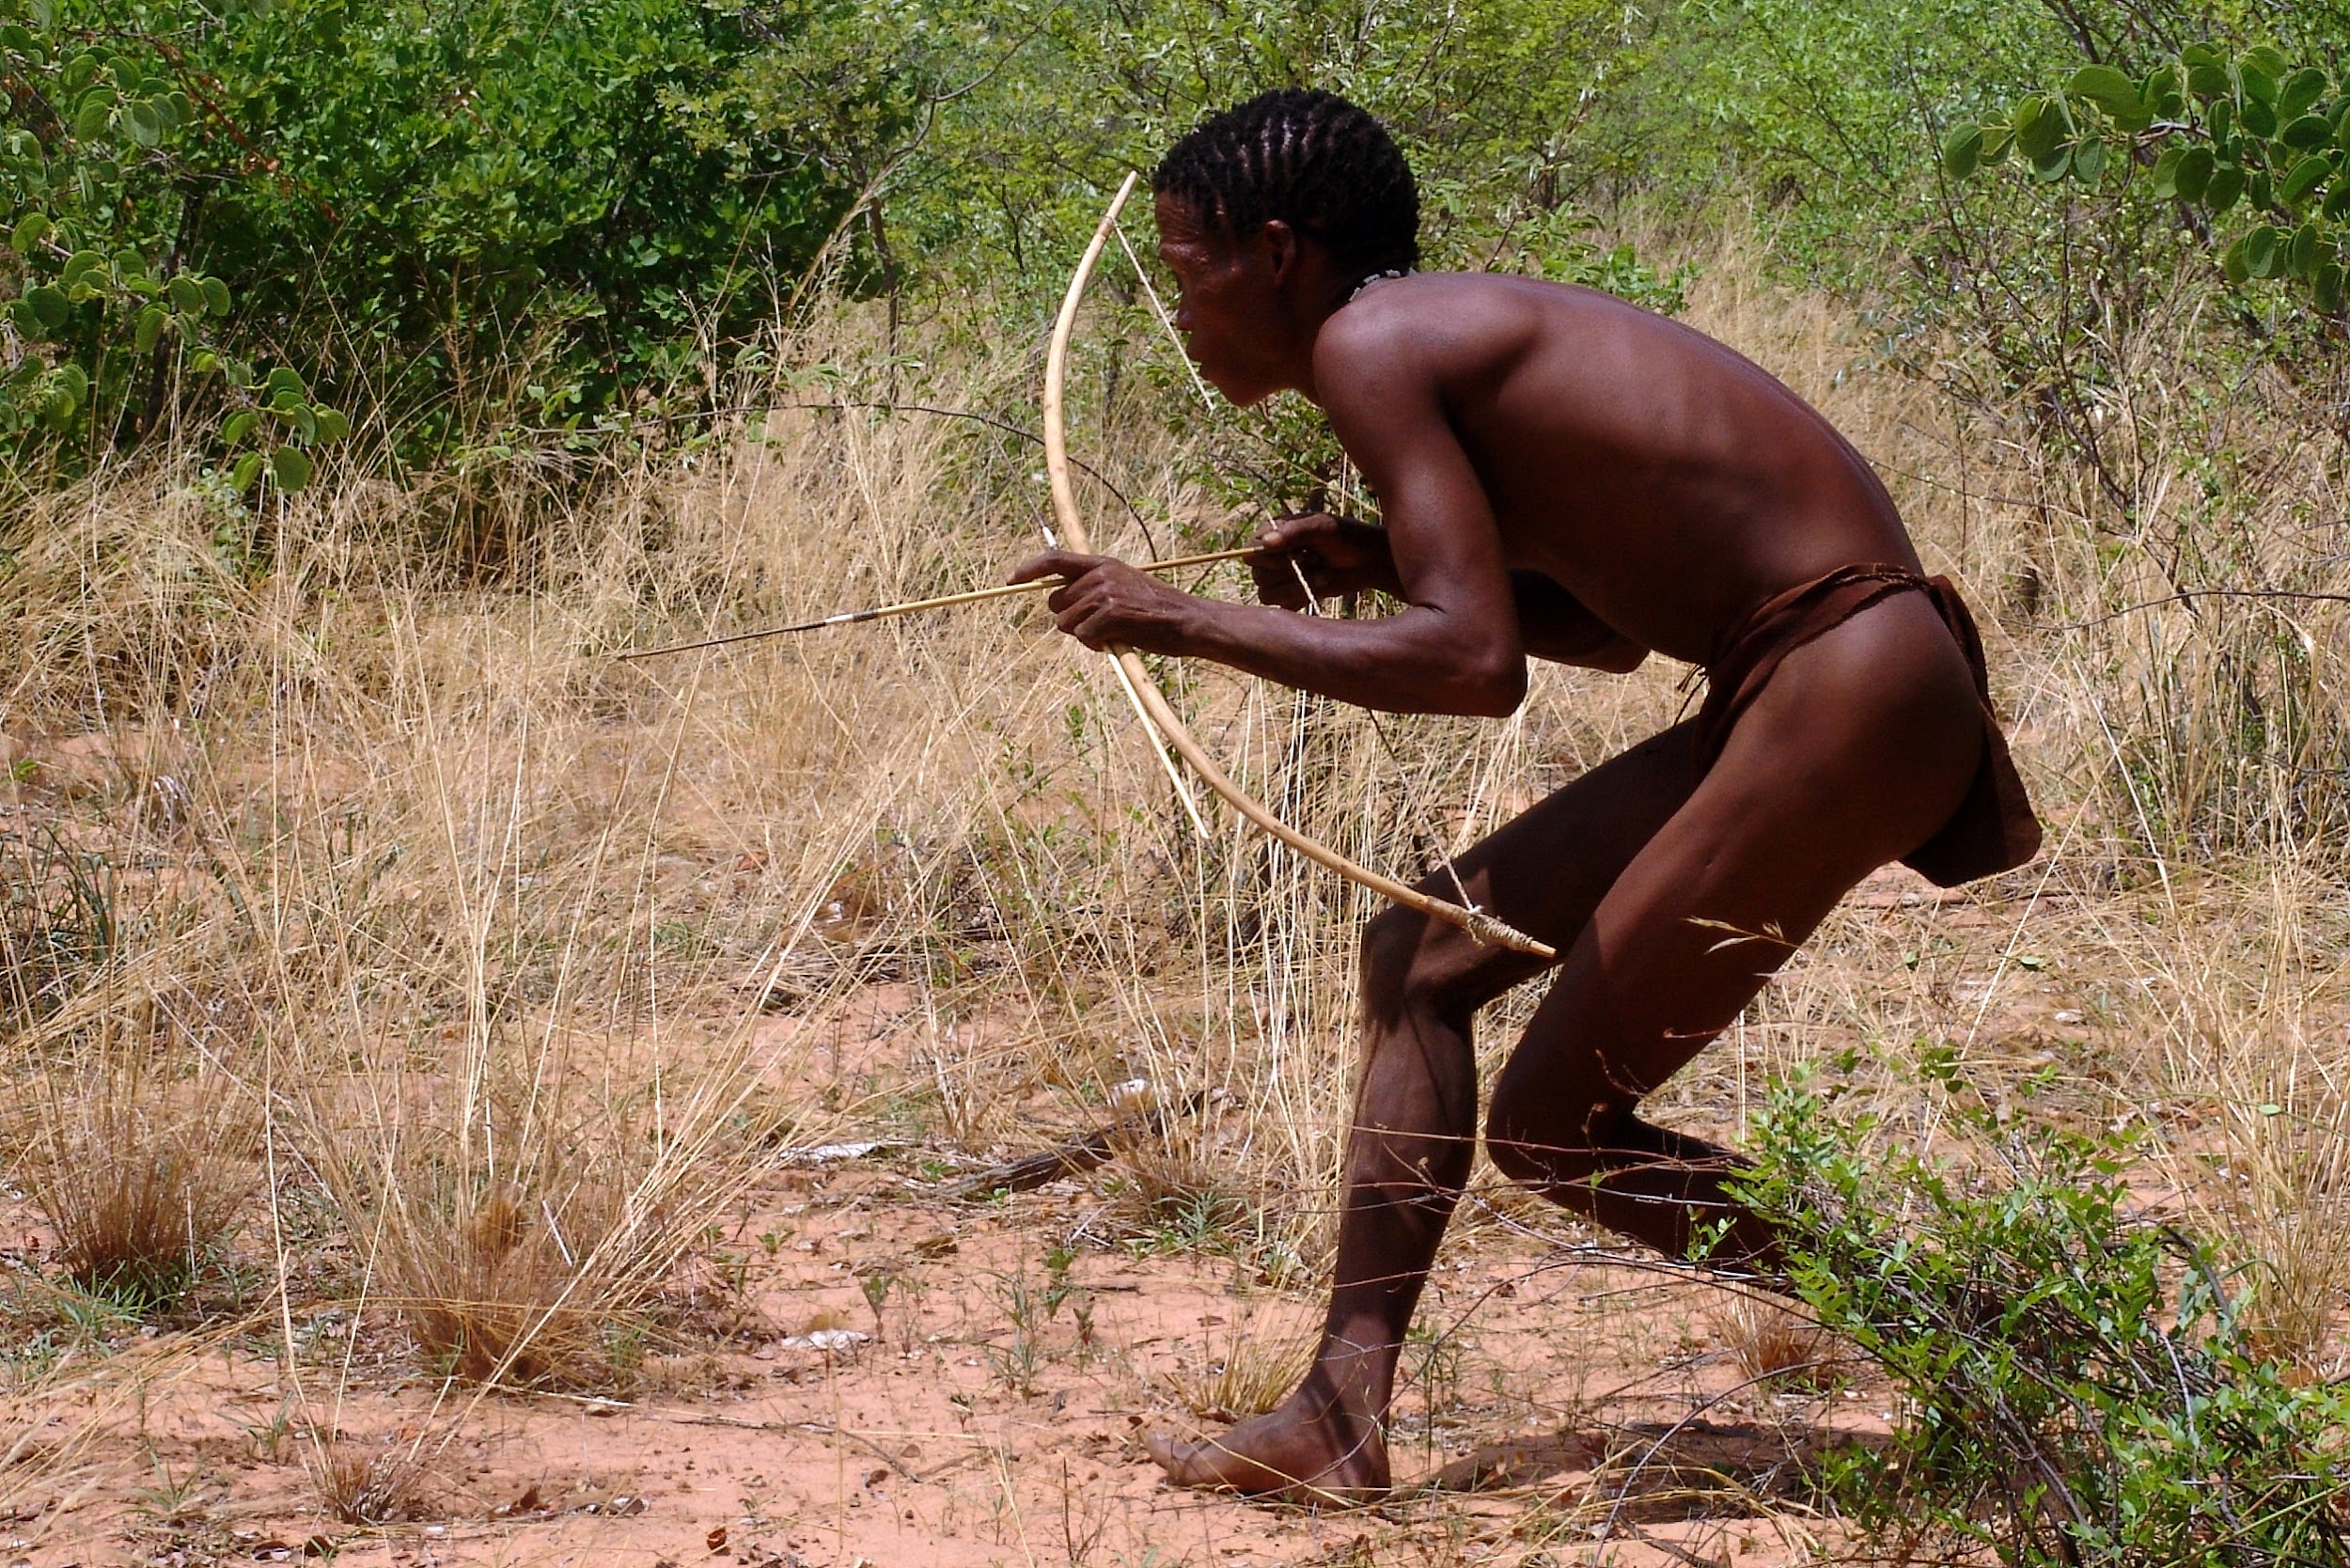 A hunter holding a bow is crouched among dry grass.